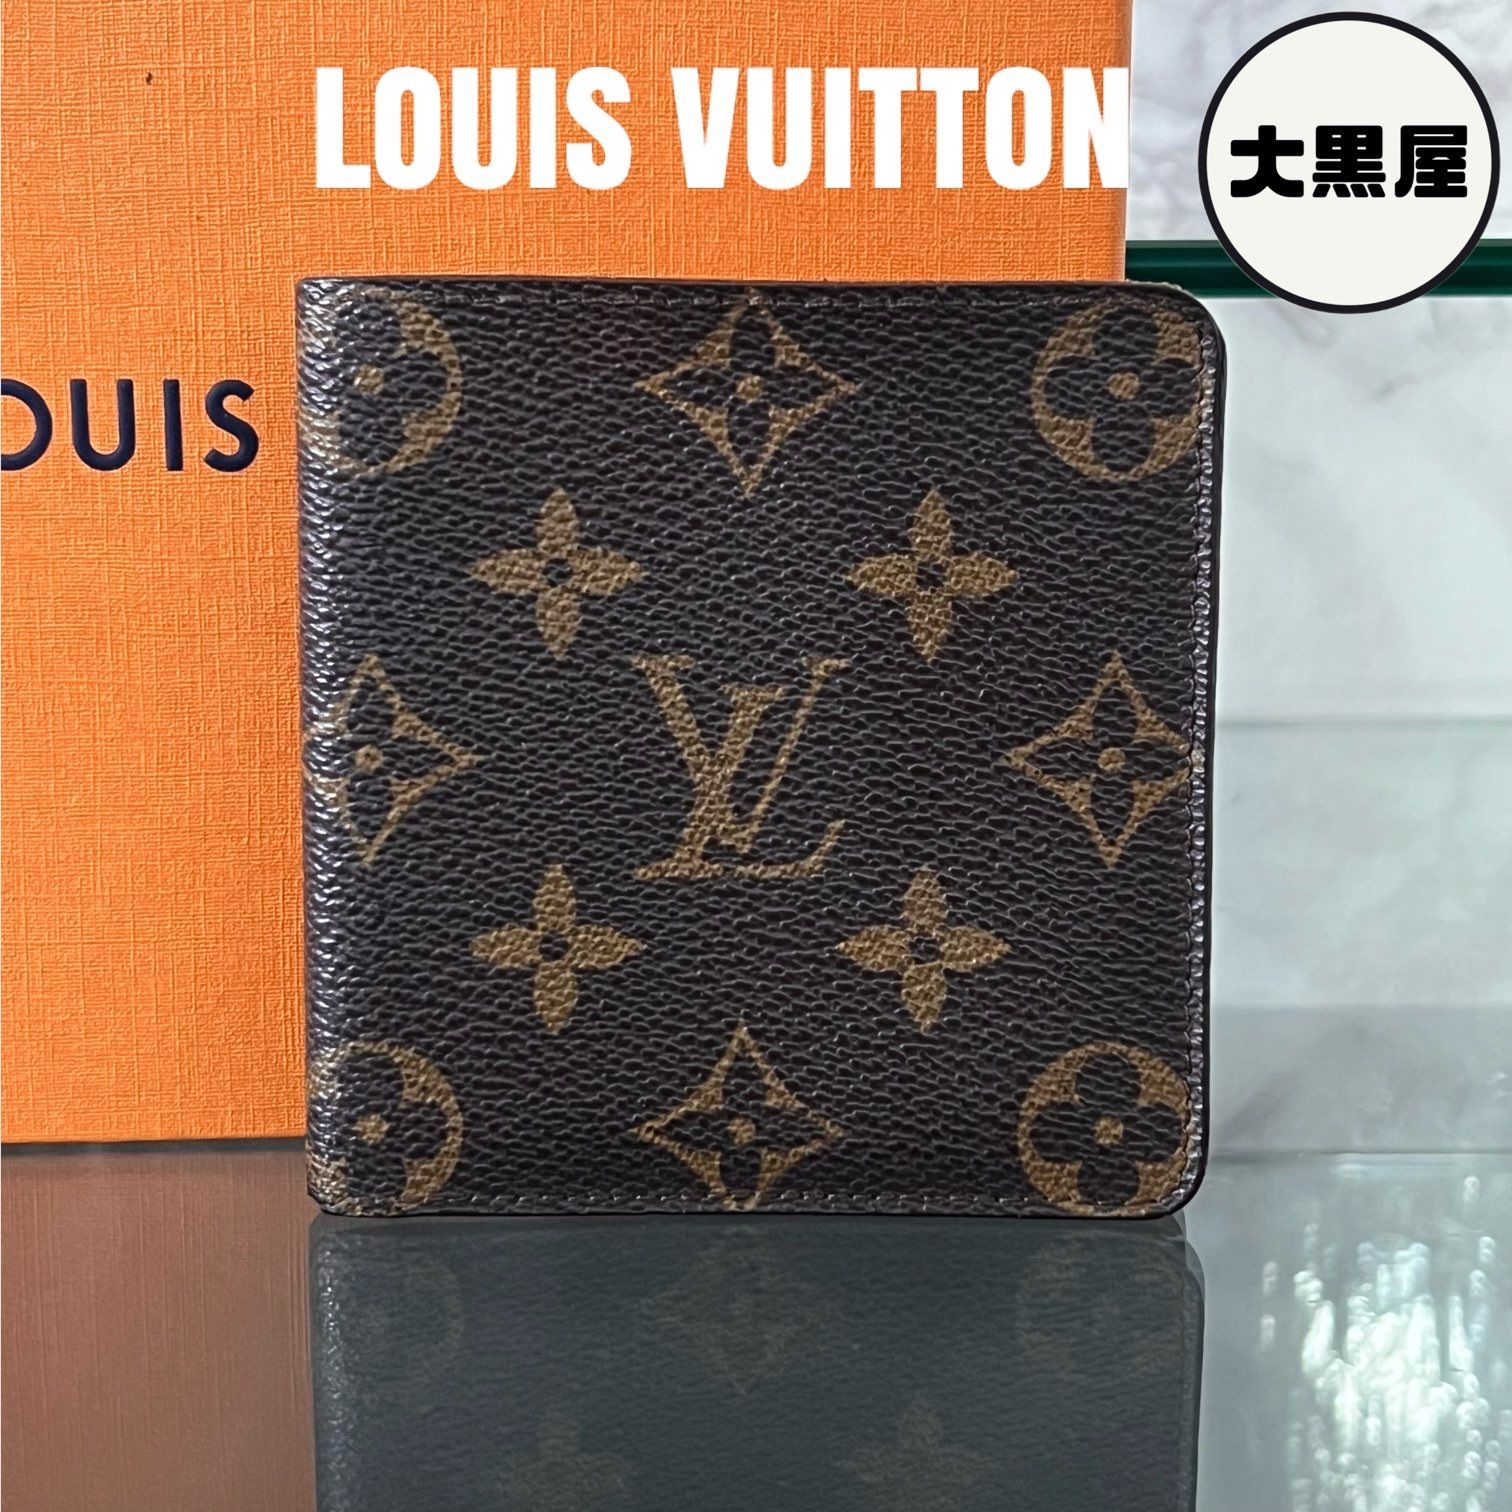 LOUIS VUITTON ルイヴィトン コンパクトウォレット 折り財布